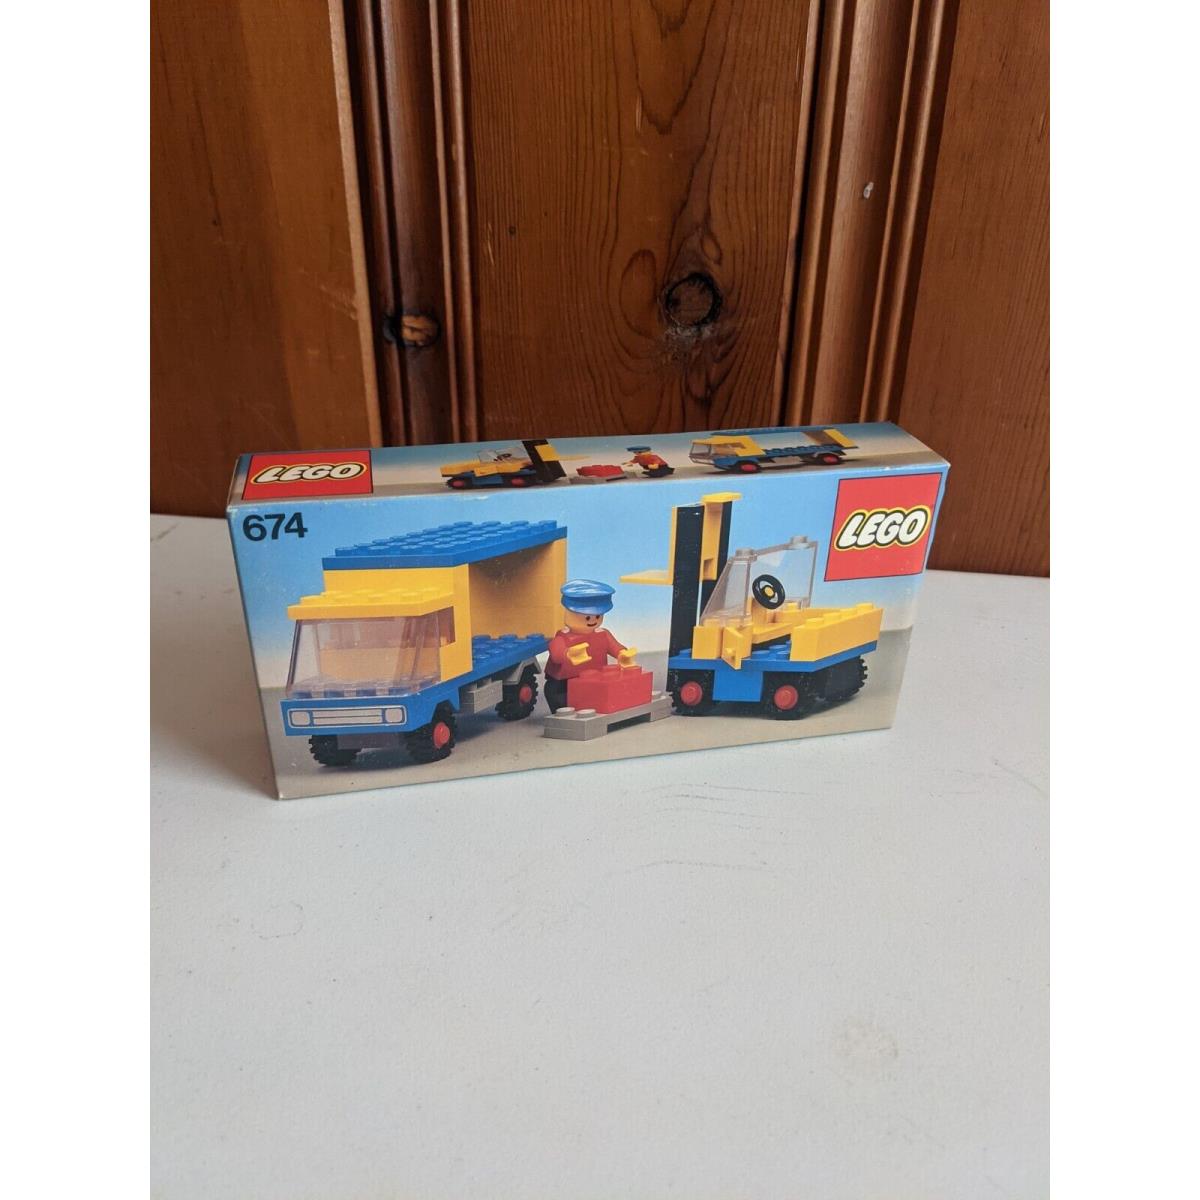 Lego Vintage Classic Town Forklift Truck 674 Misb Box 1978